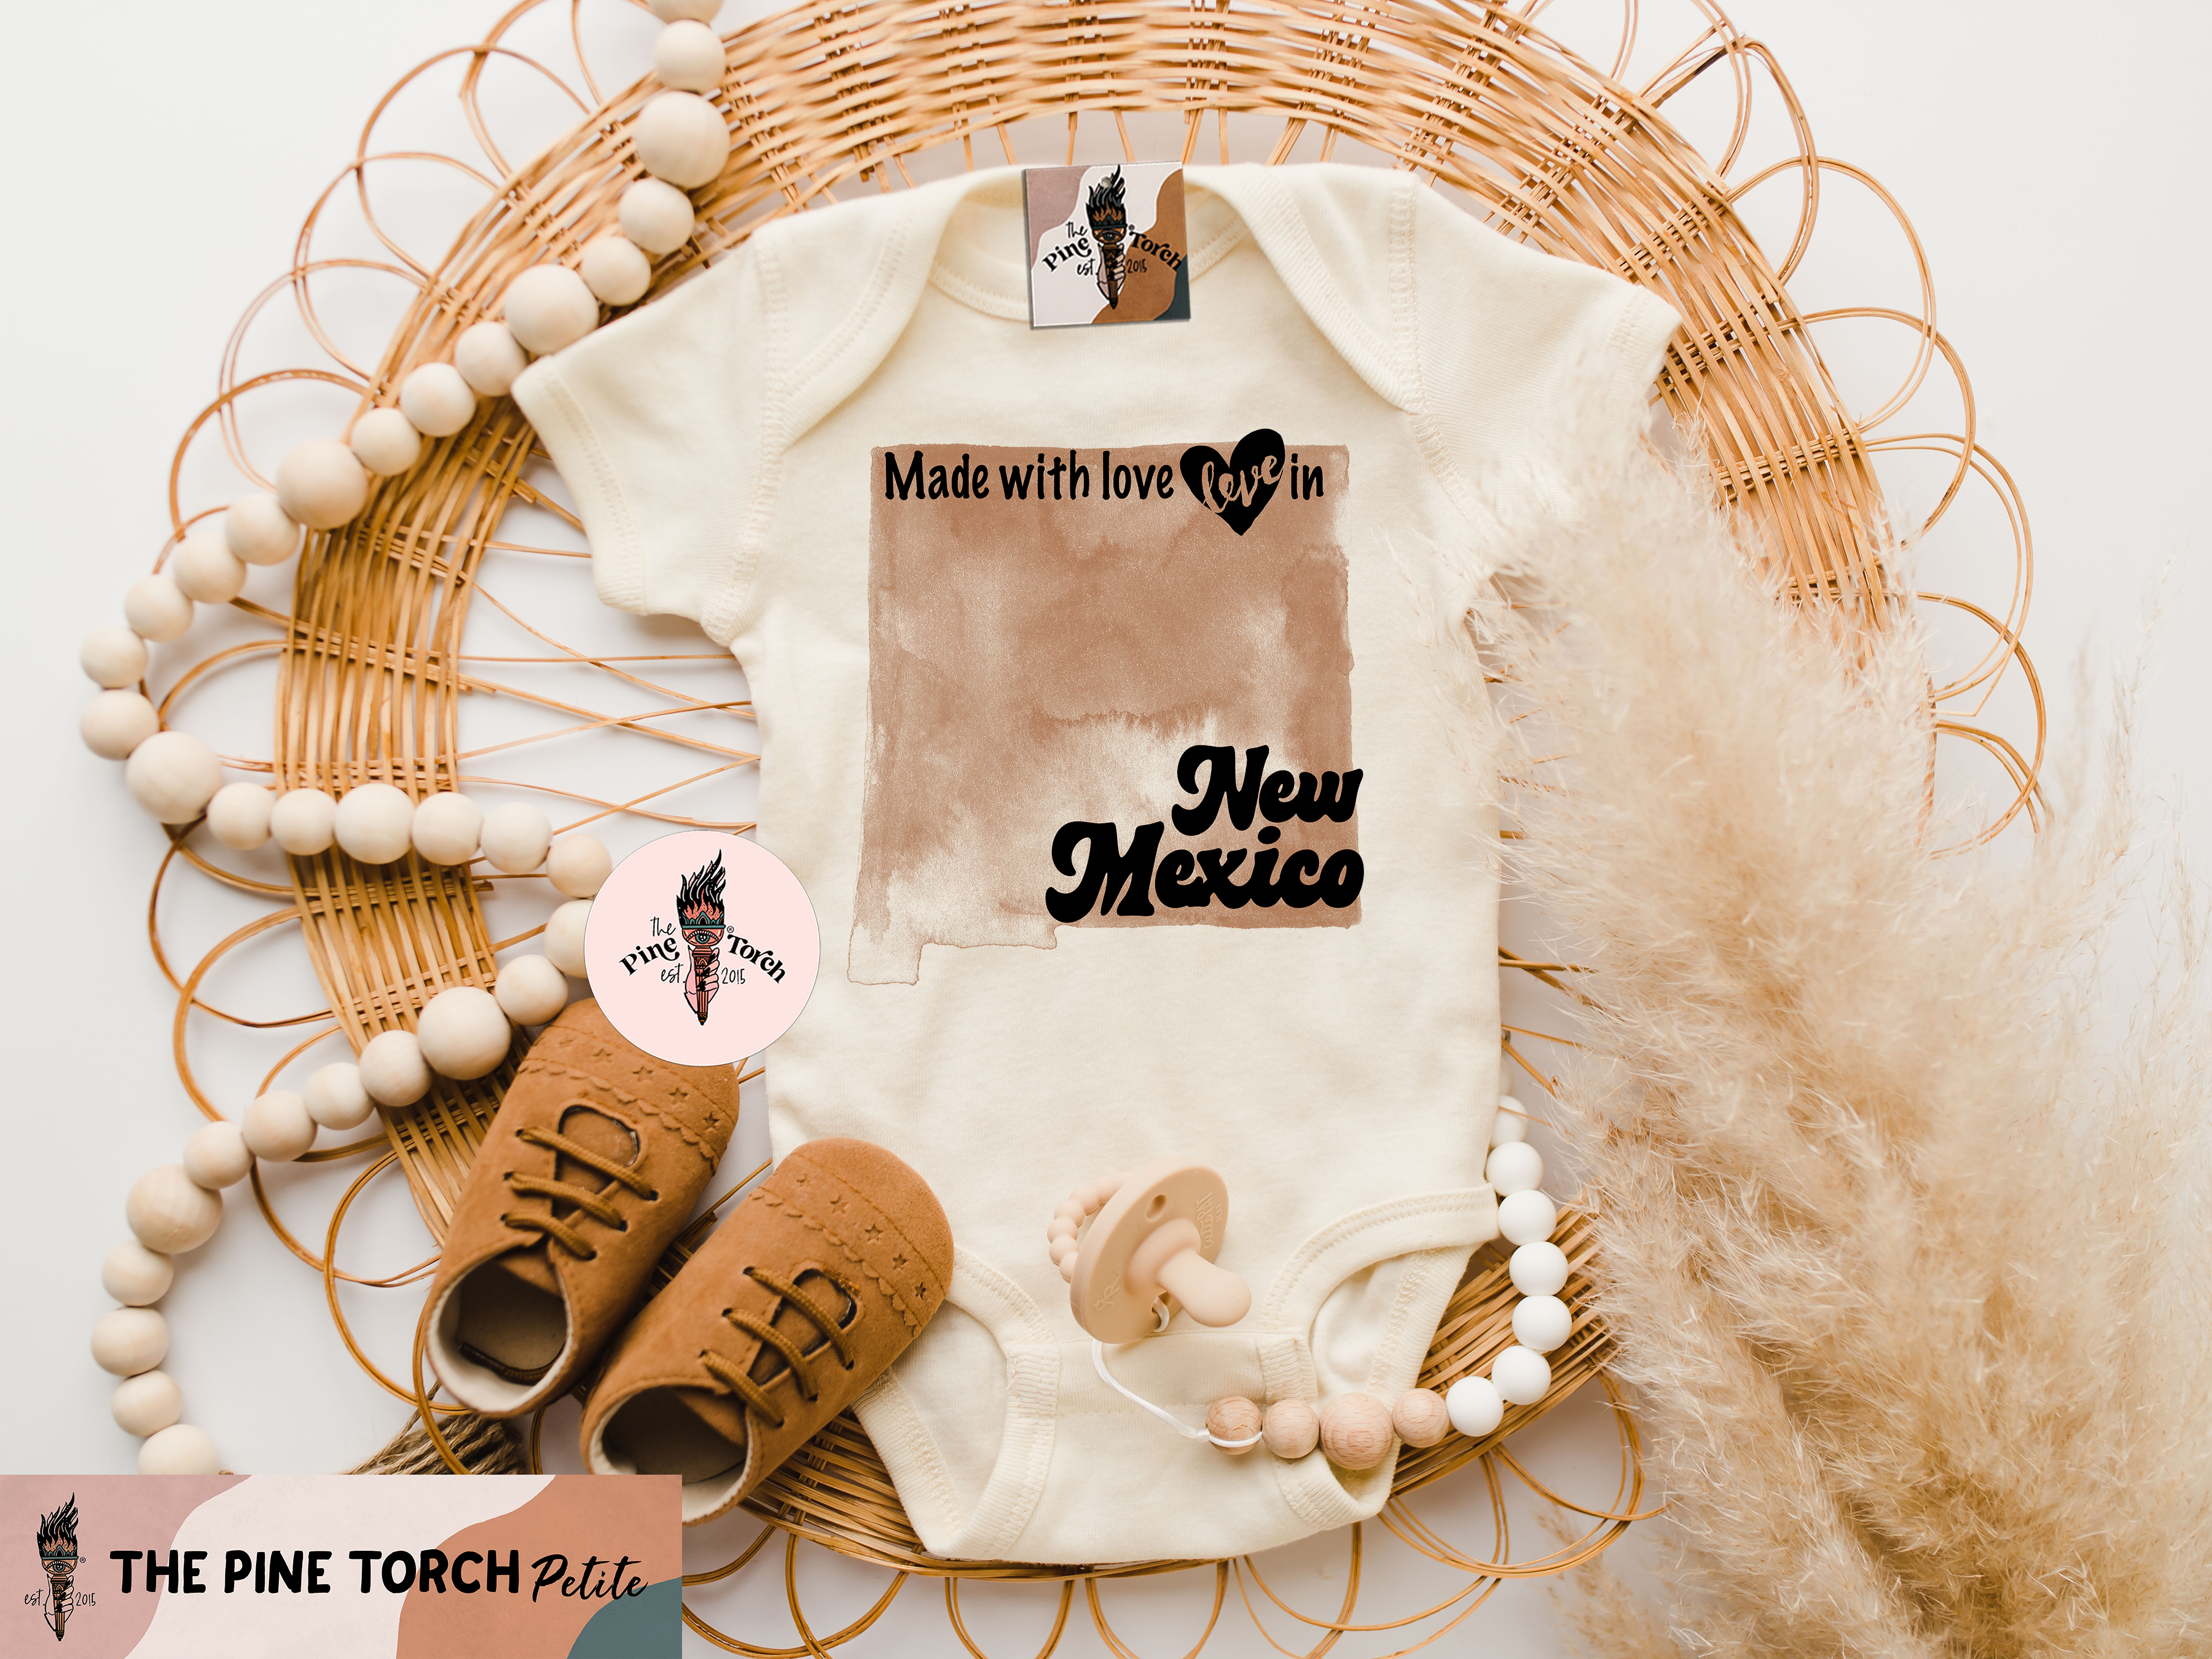 « MADE WITH LOVE IN NEW MEXICO » BODYSUIT